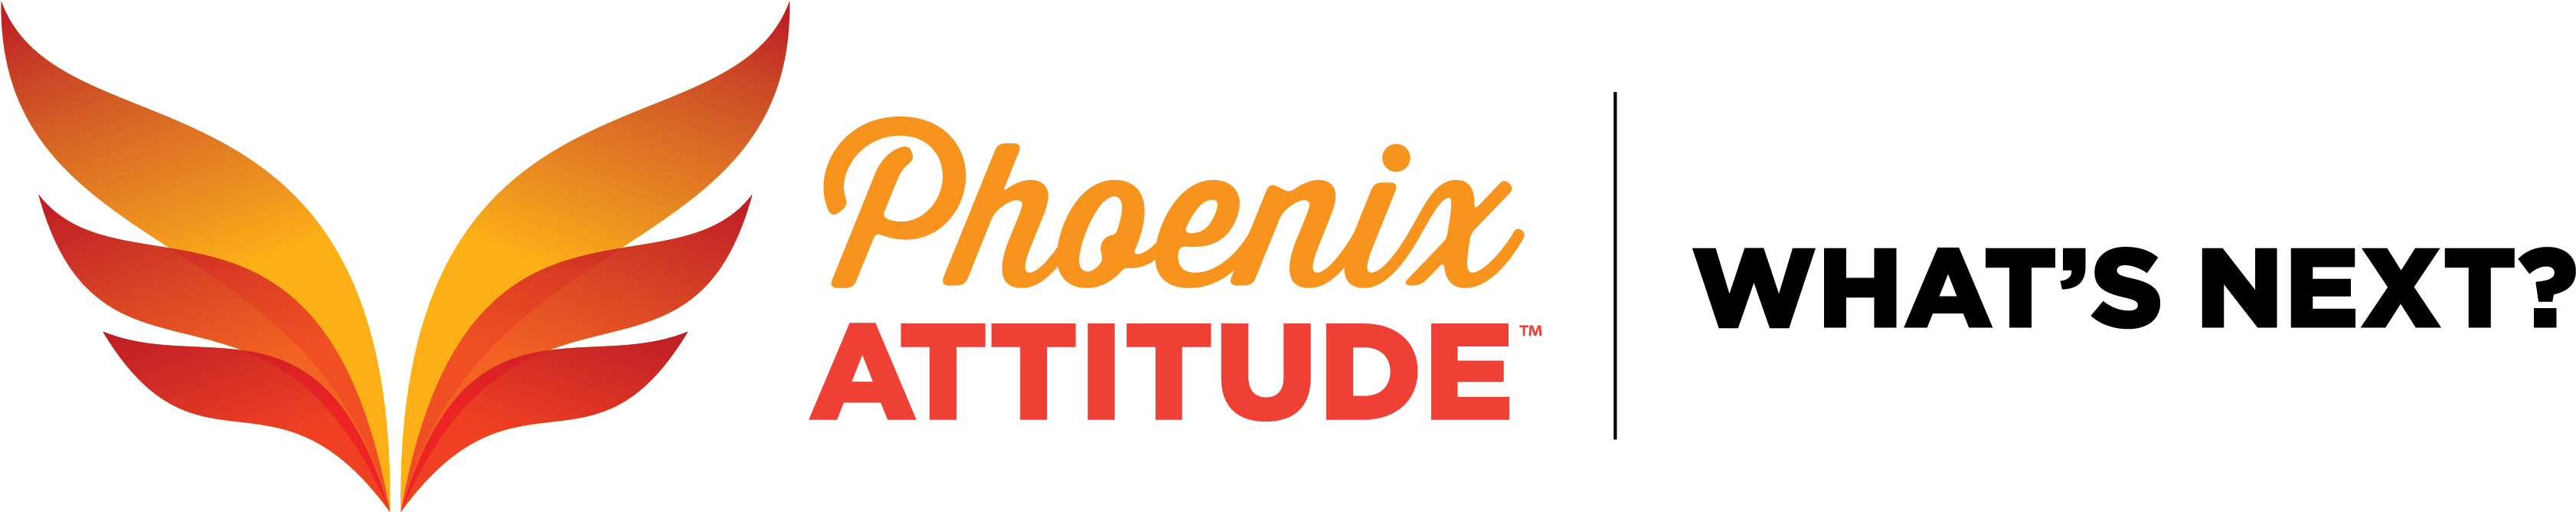 Phoenix Attitude Logo, Tagline, What's Next - Gift Of Attitude: 10 Ways To Change The Way You Feel (3648x811), Png Download